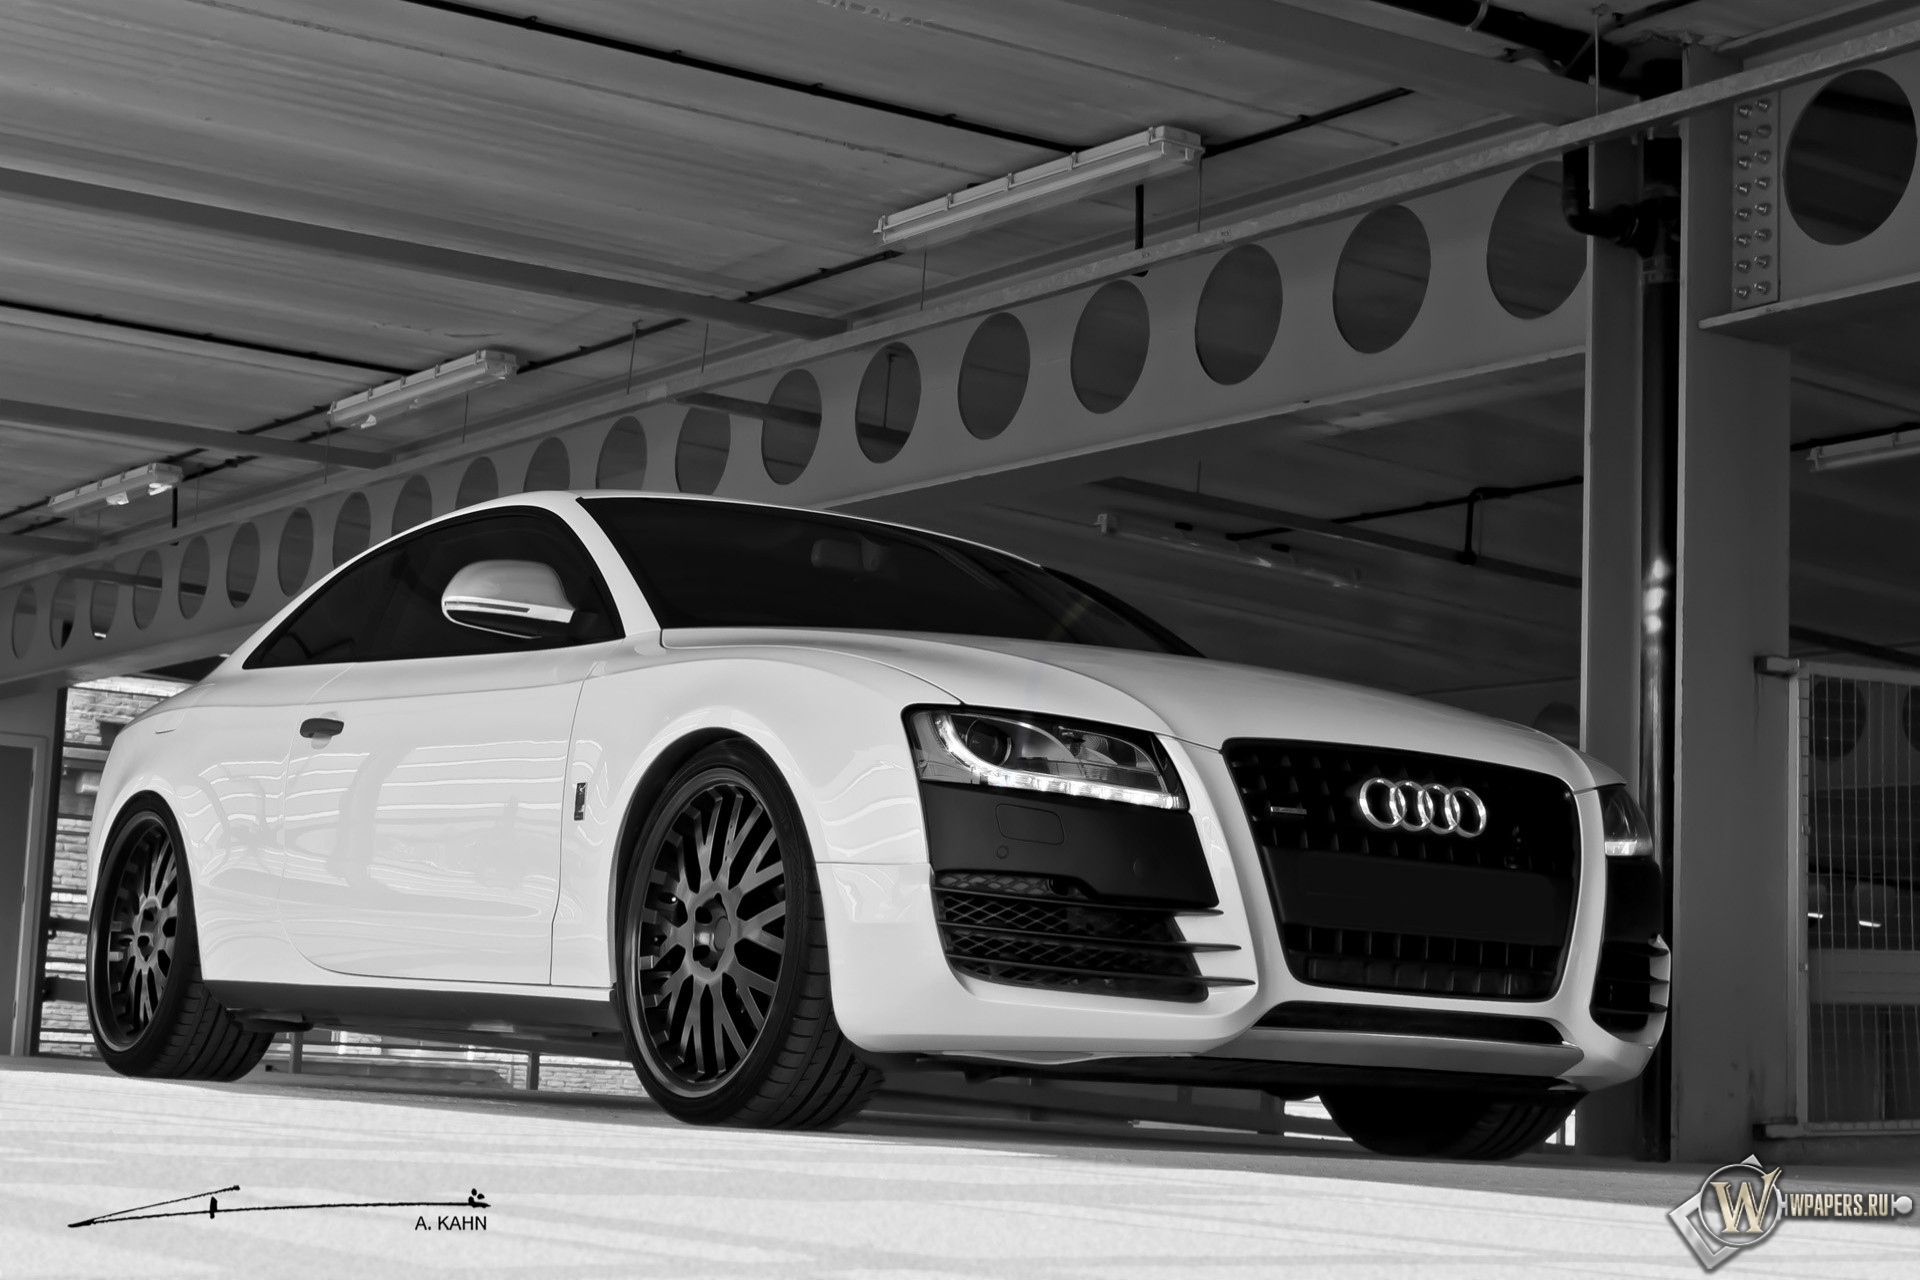 2011 Project Kahn Audi A5 Coupe Sport - Front Angle 1920x1280